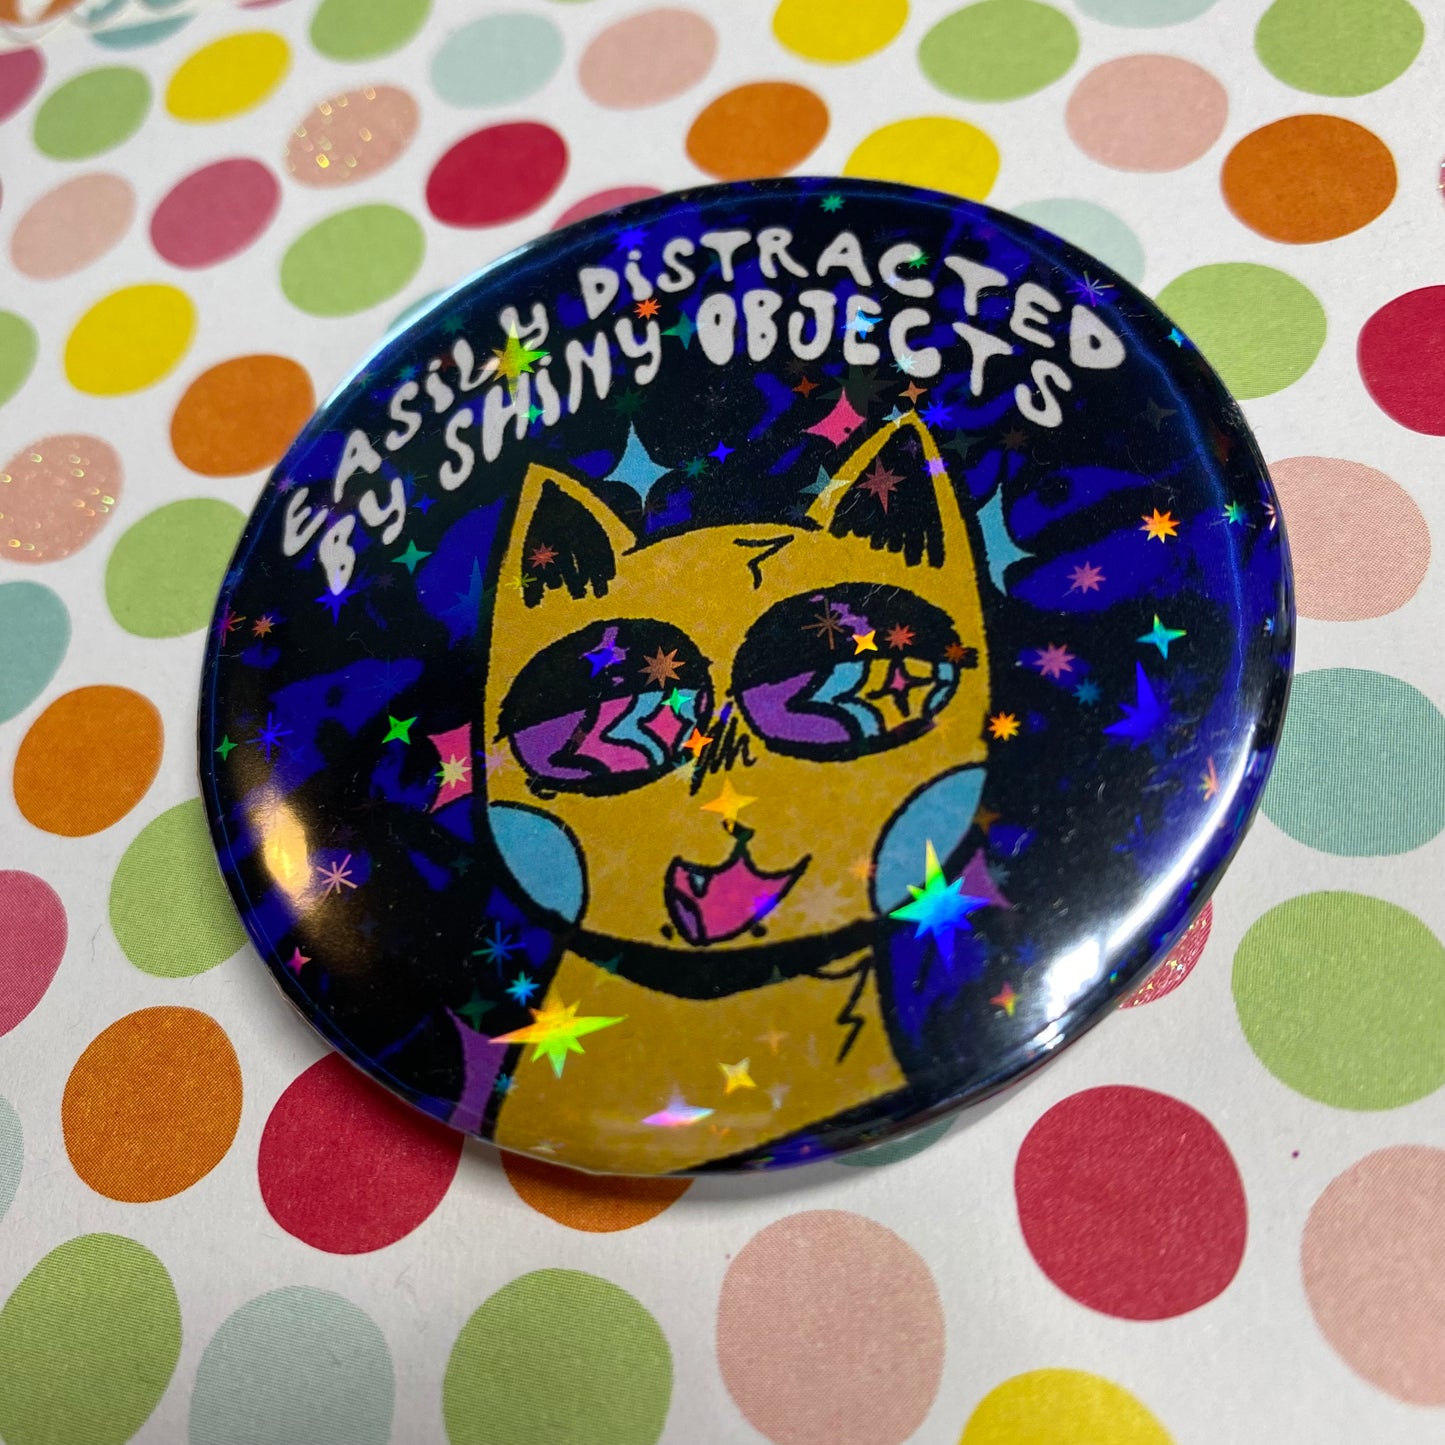 Distracted by Shiny Objects Cat Button